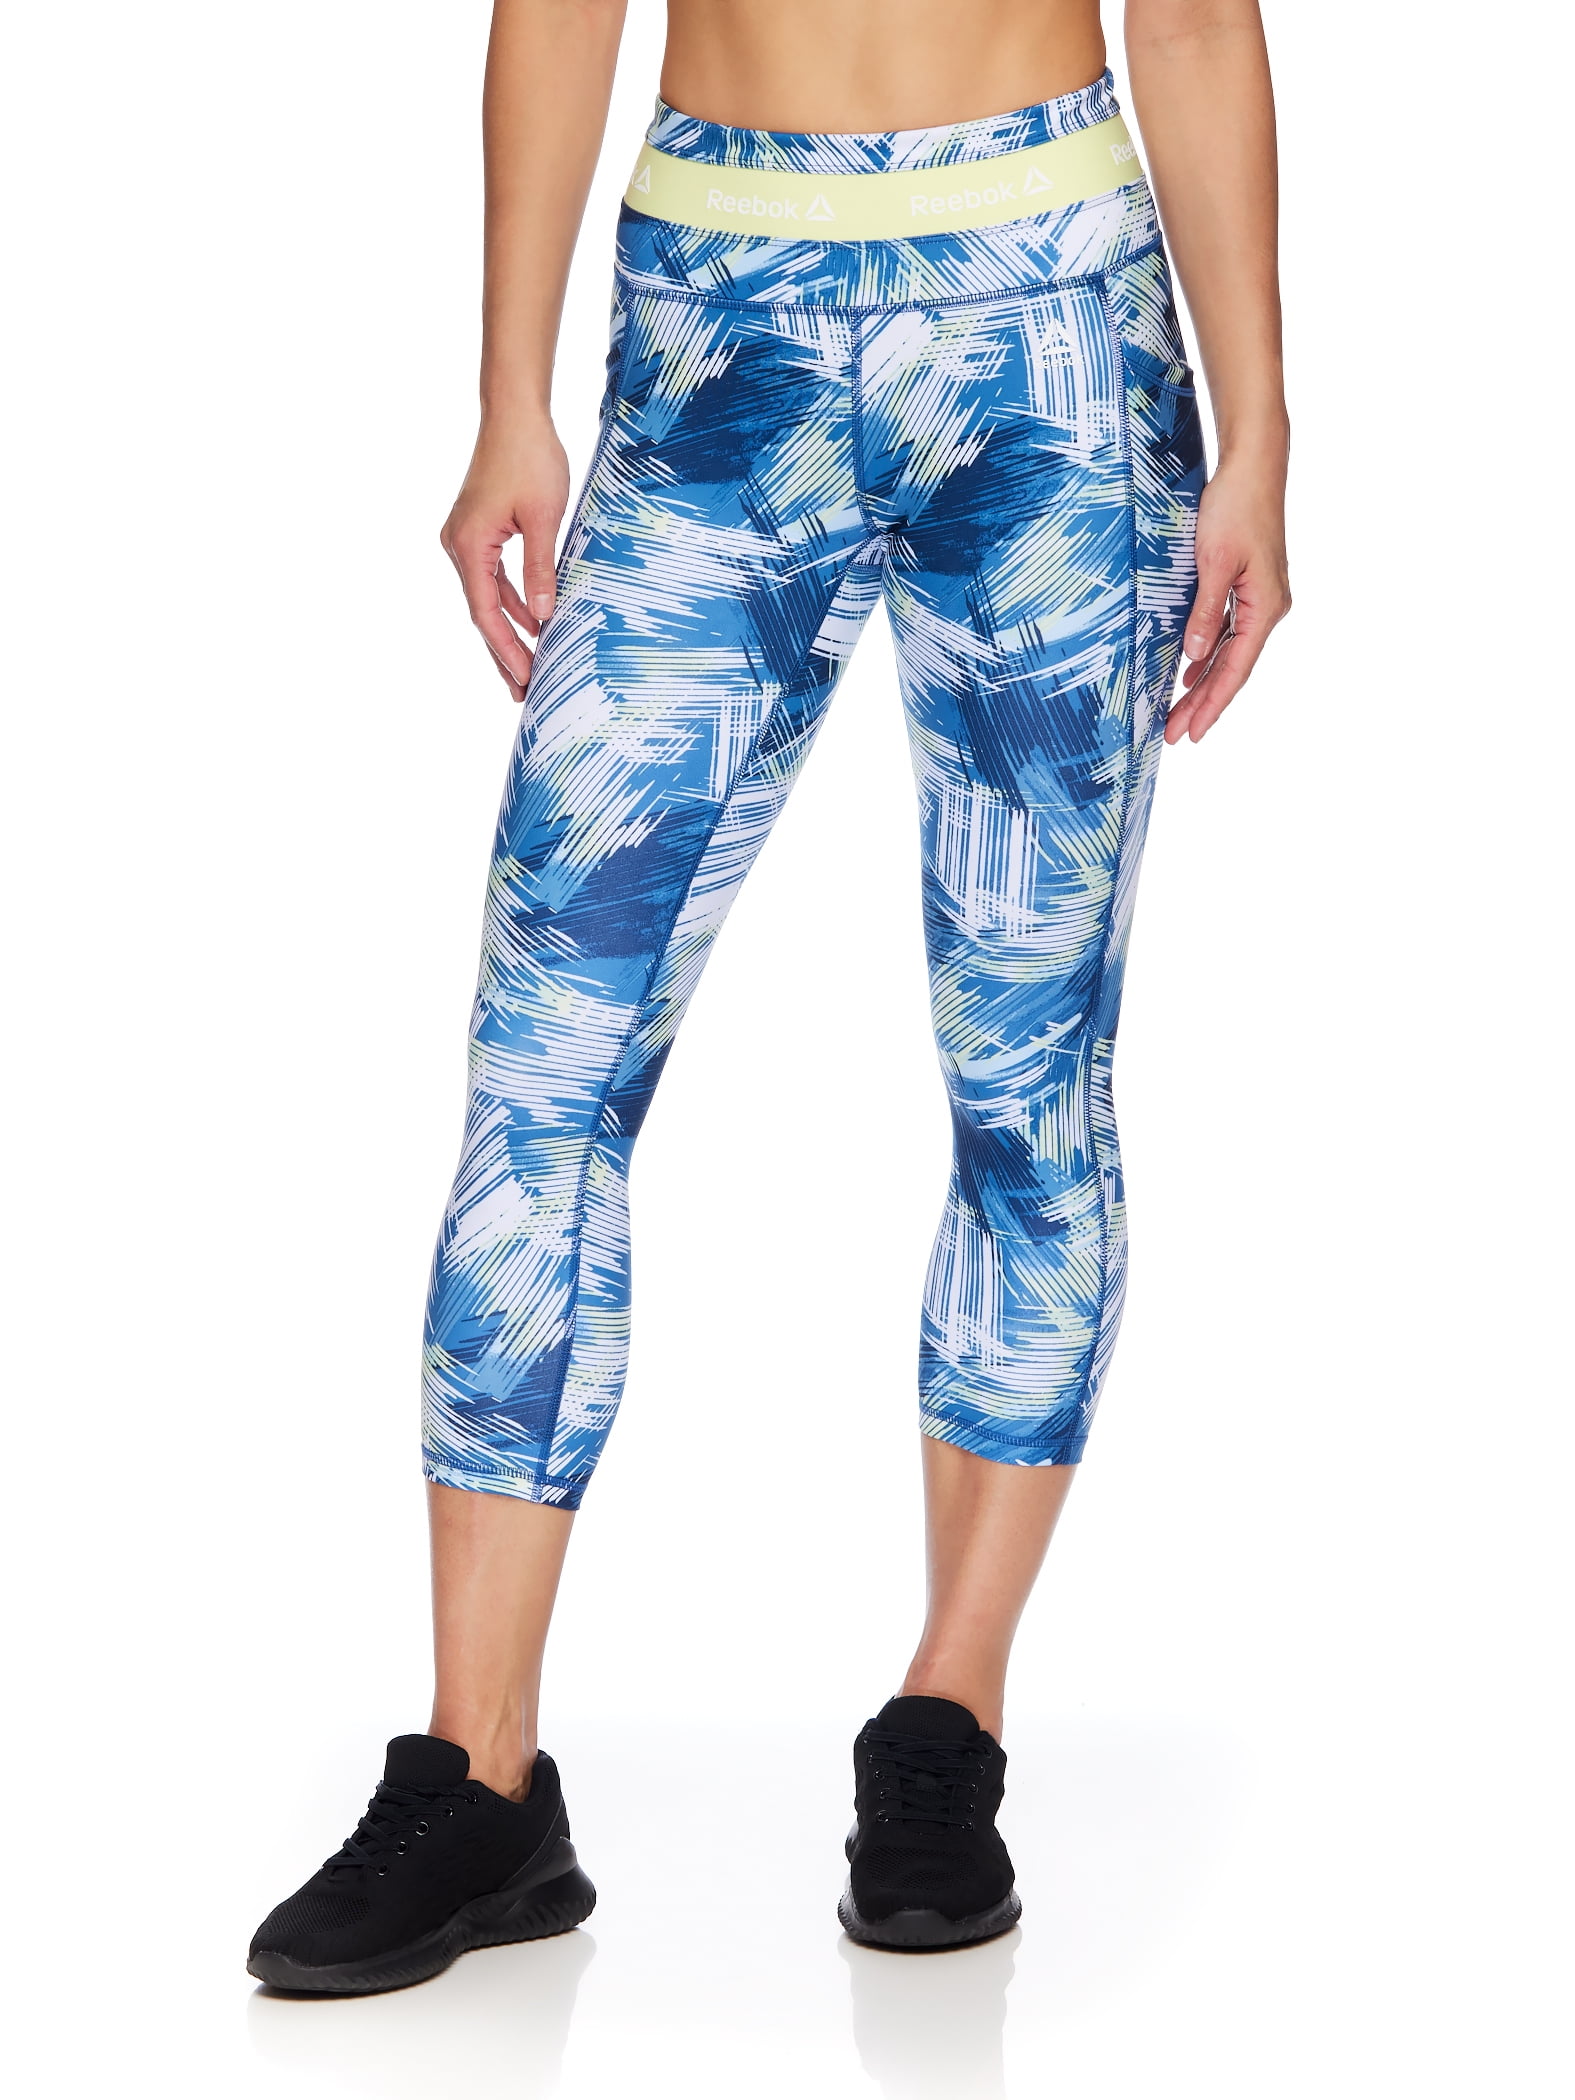 MIX IT UP! LEGGINGS or CAPRI'S W/YOUR FAVE TOP!) – RIZZQUE CLOTHING